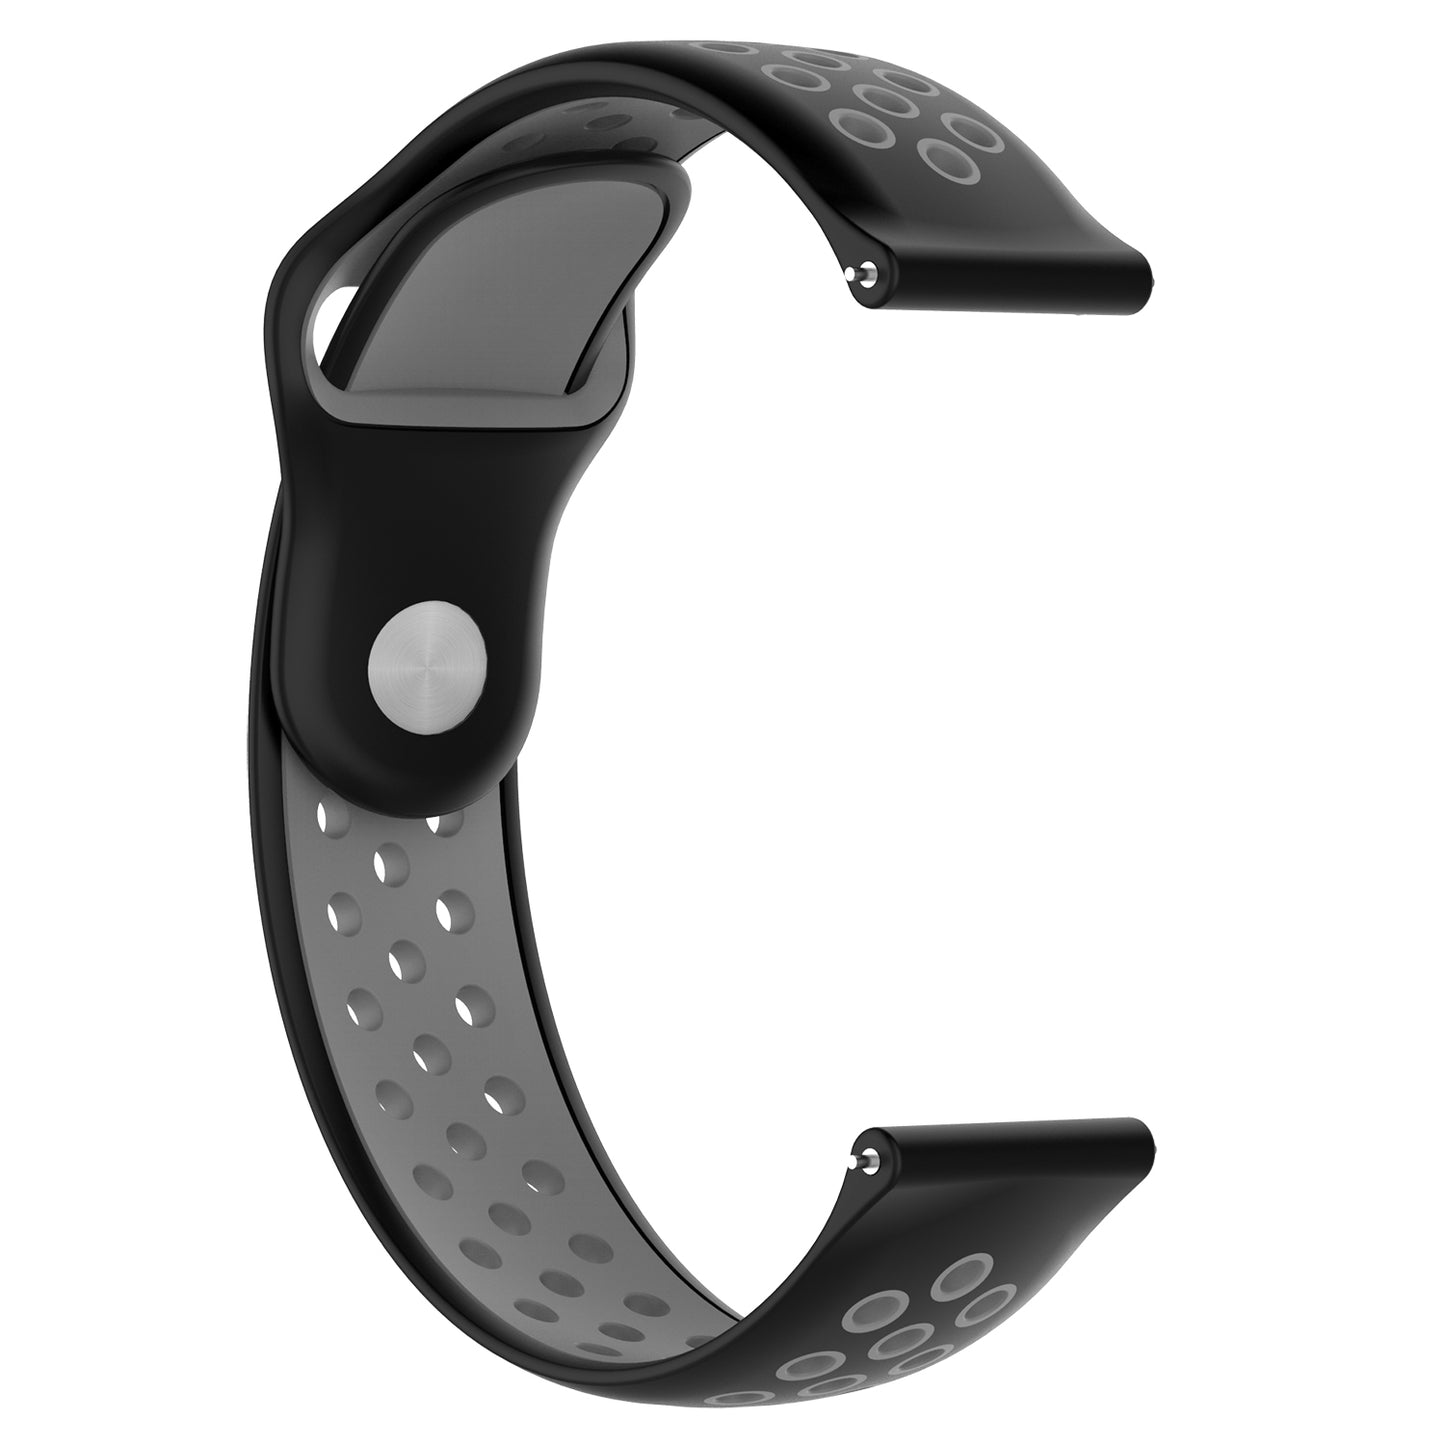 Perforated Rubber Strap for Samsung Galaxy Watch, Gear S3 & Others